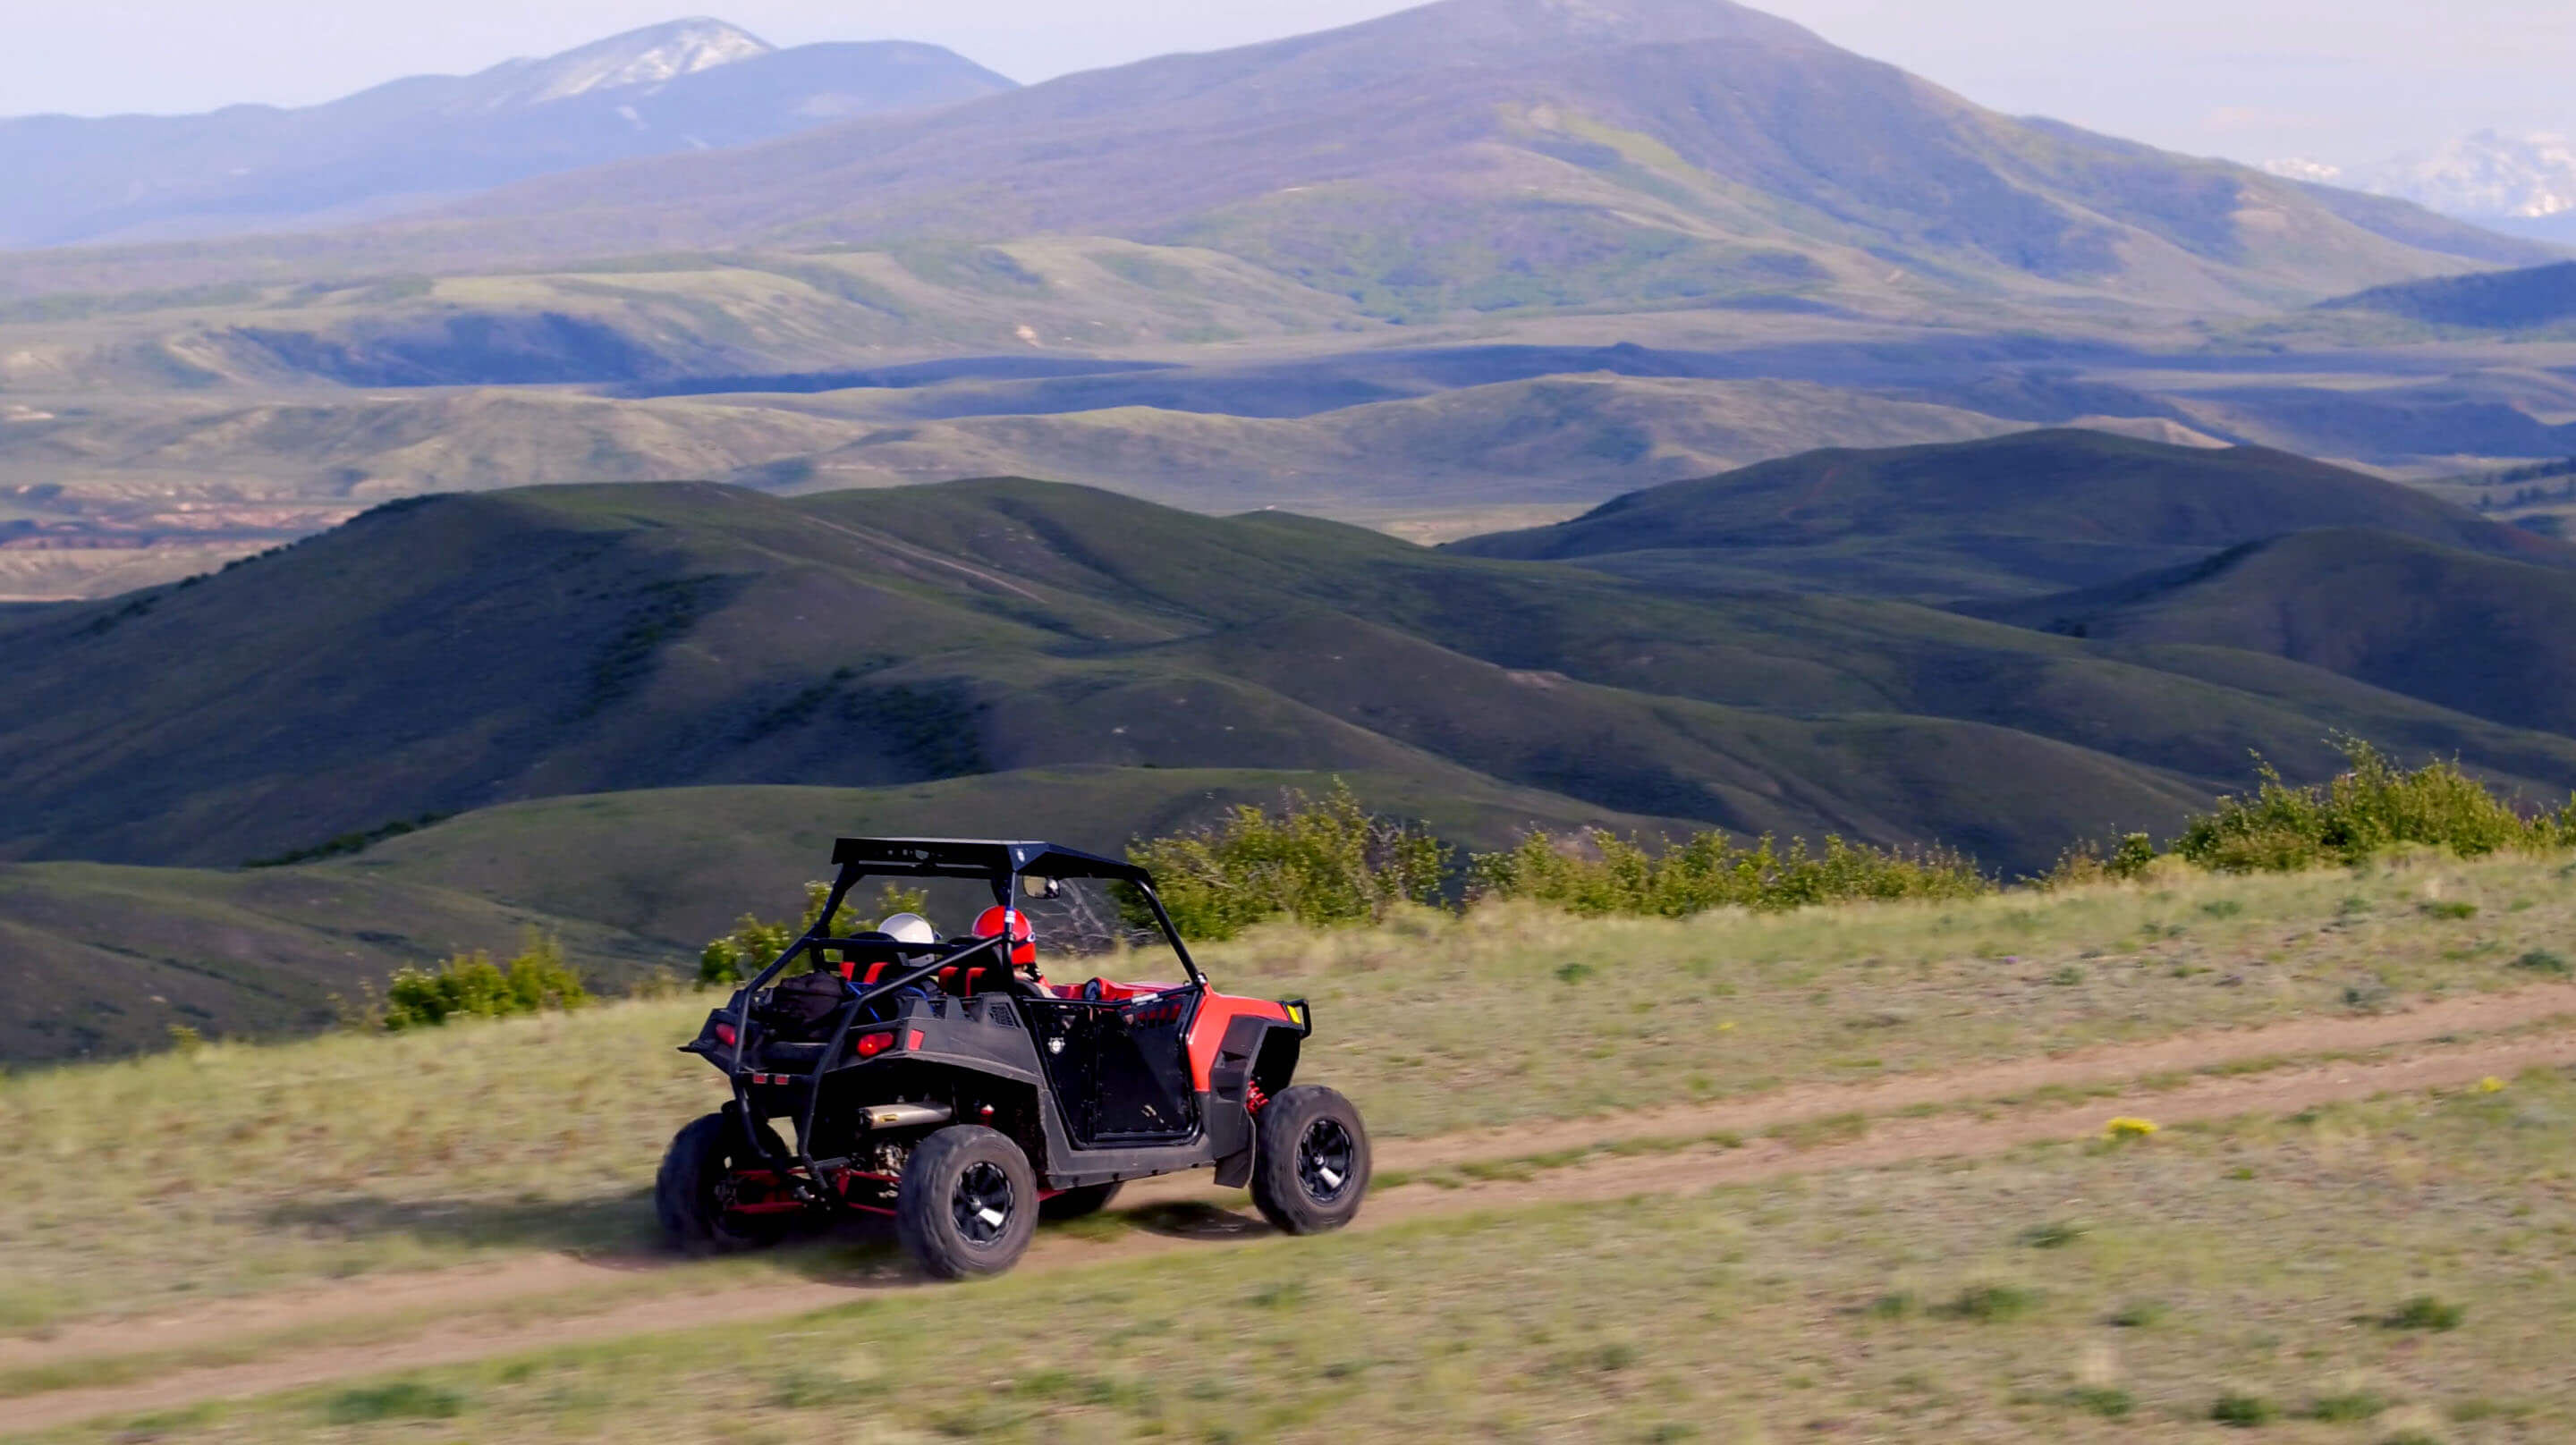 Black and red UTV with Colorado mountains in the background